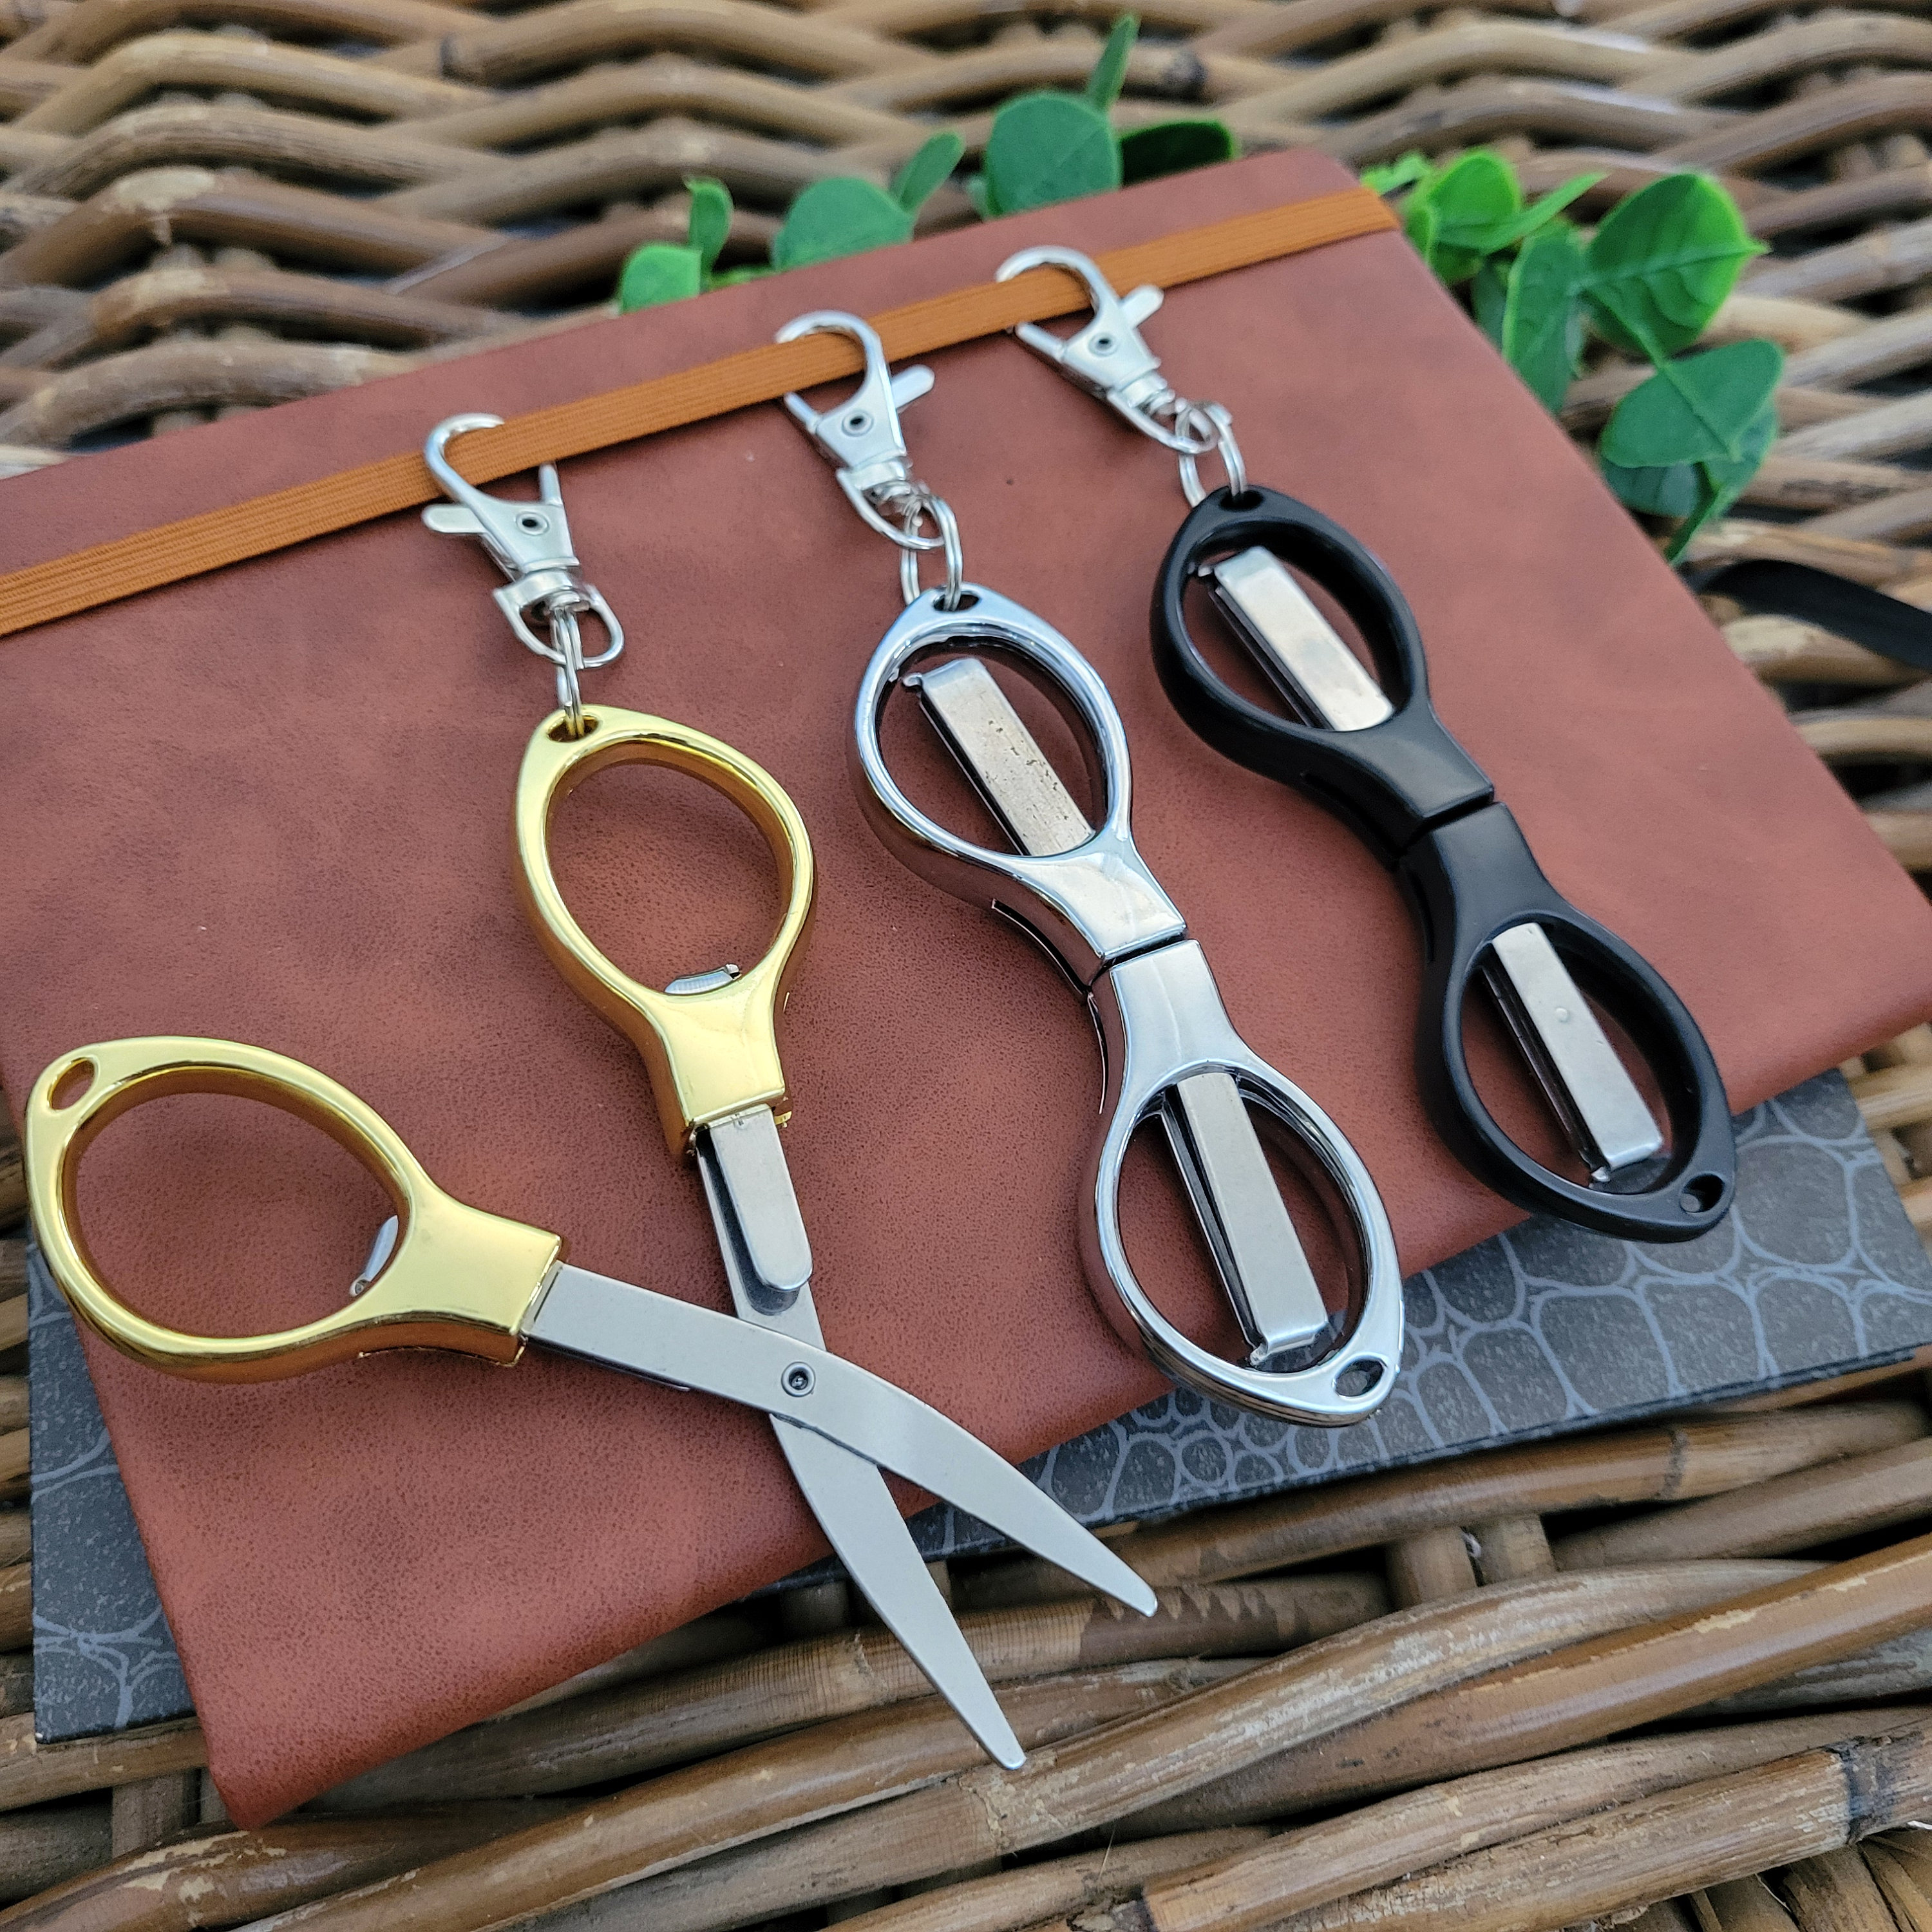 Mini Folding Scissors with Clip, Clip on Folding Scissors, Badge Reel Scissors, Badge Reel Accessories, Clip on Scissors for Backpack